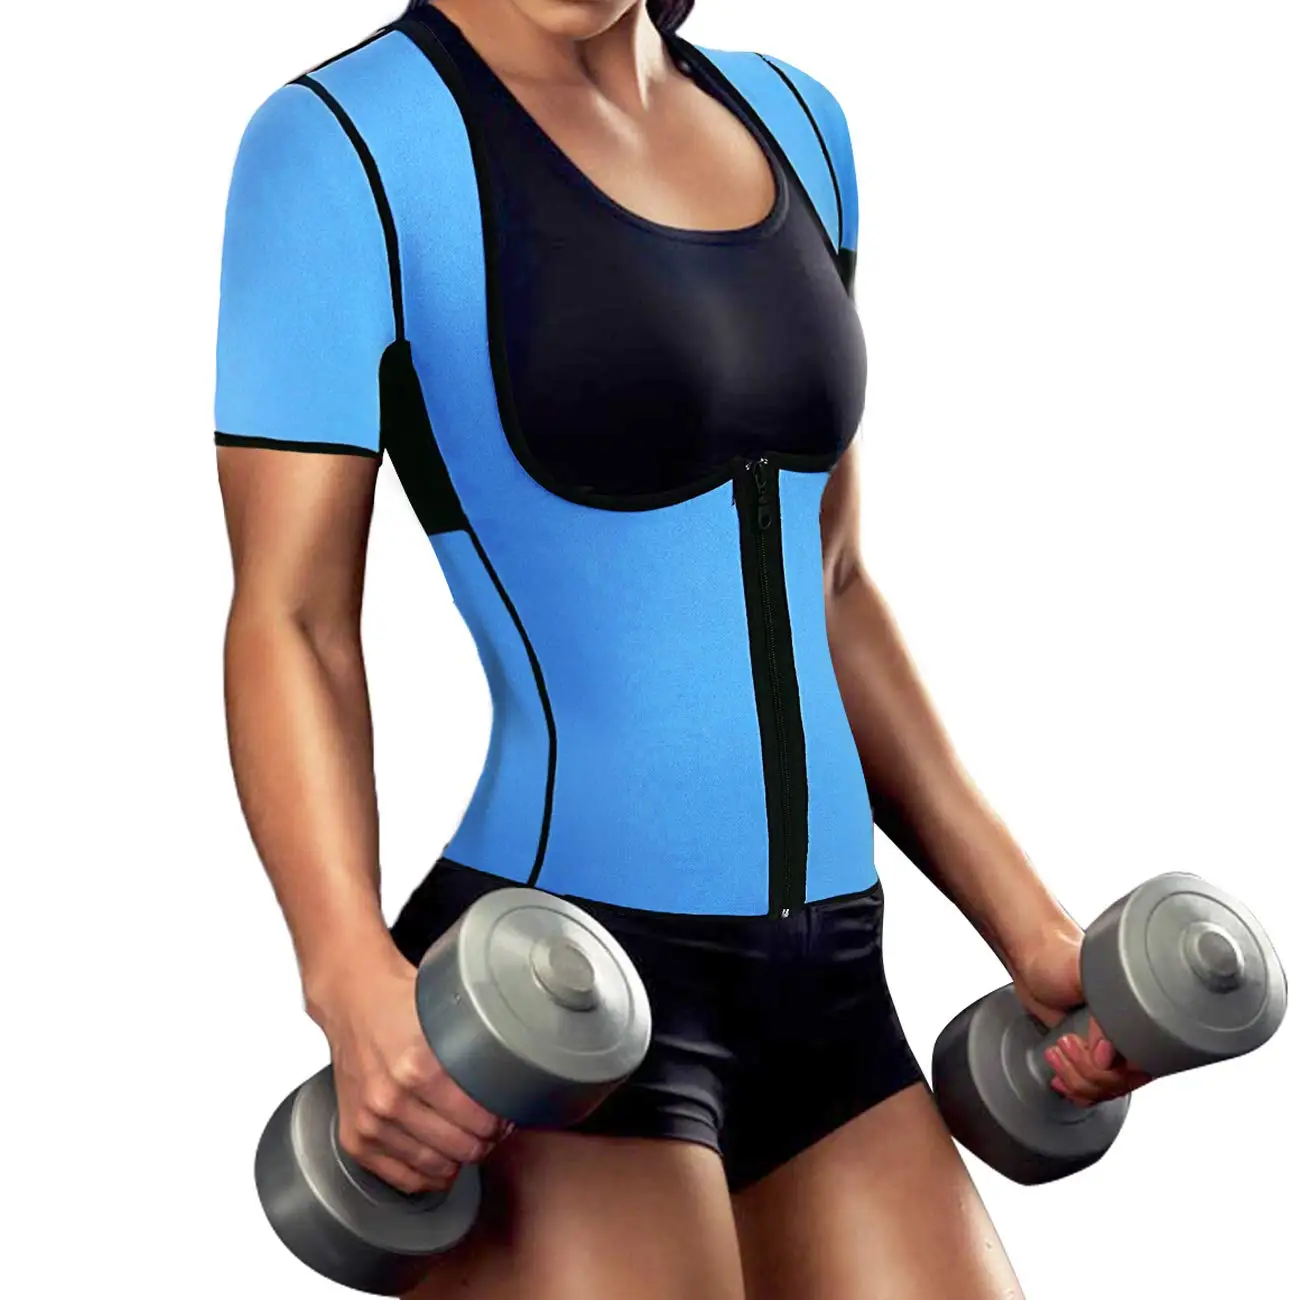 10 Minute Workout waist trainer vest for Weight Loss